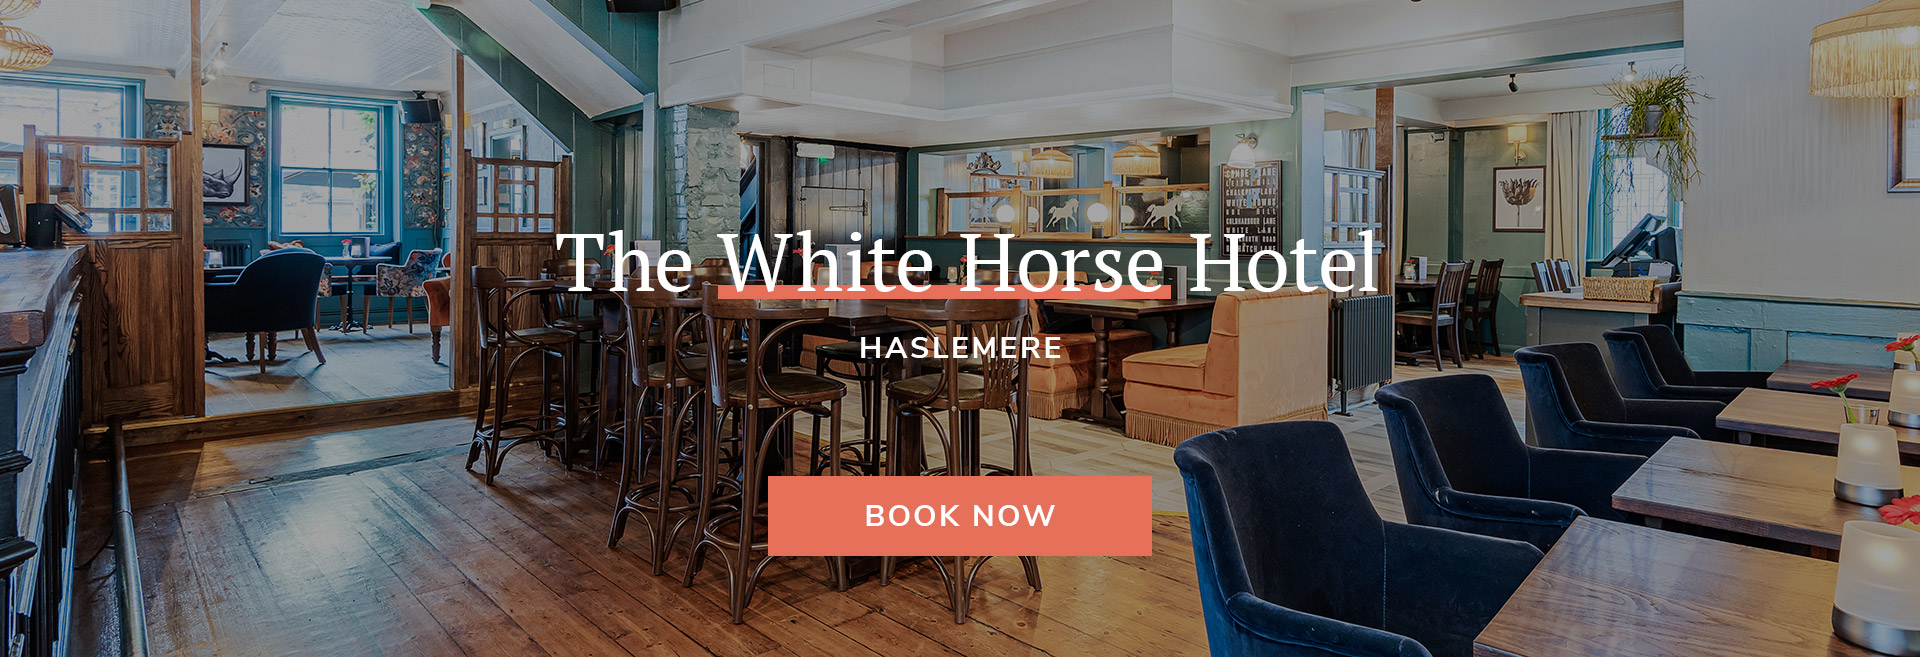 The White Horse Hotel Banner 3